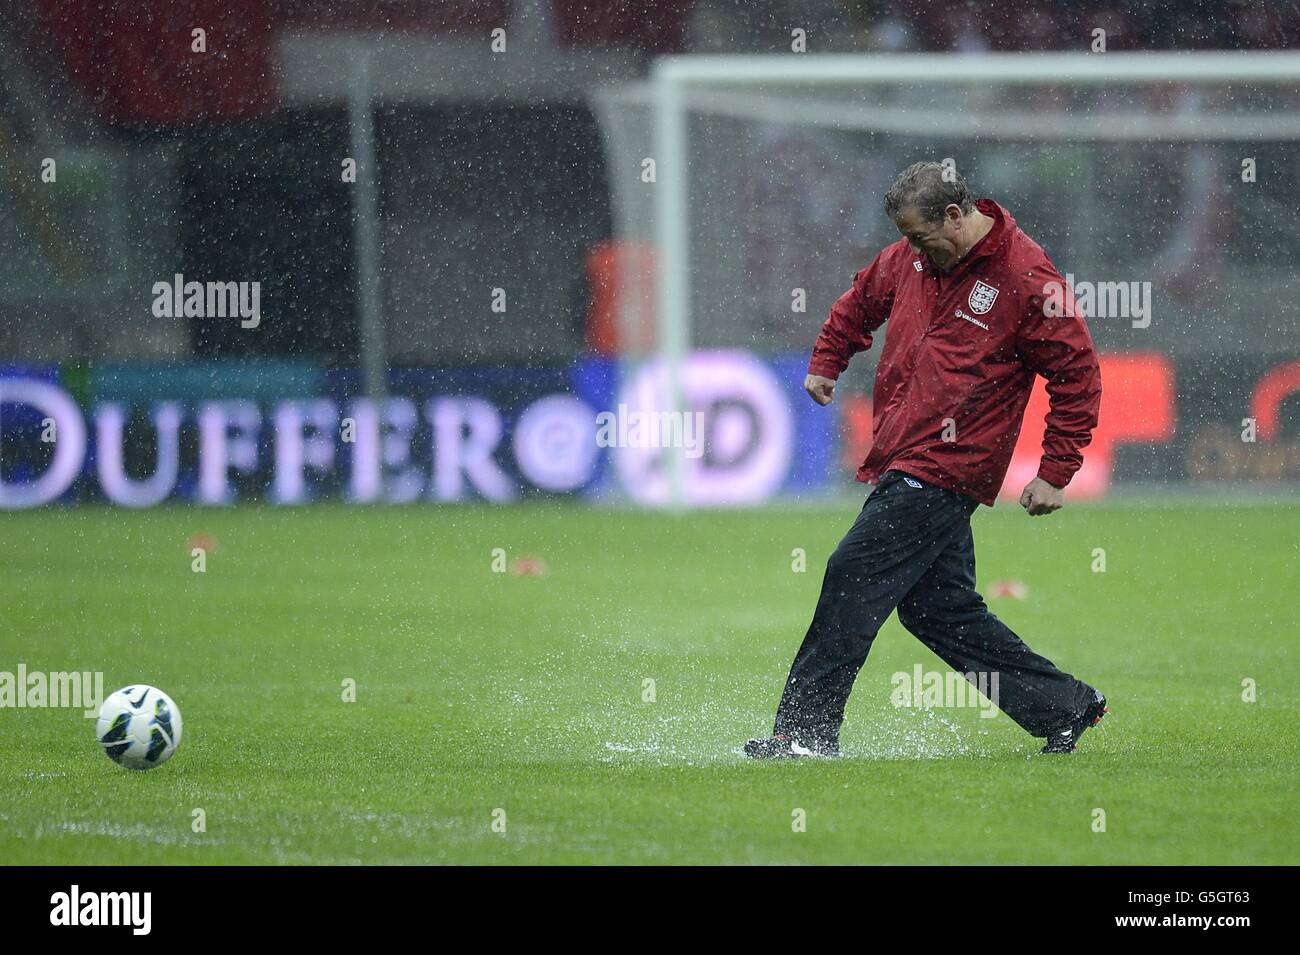 Soccer - 2014 FIFA World Cup - Qualifier - Group H - Poland v England - National Stadium. England manager Roy Hodgson tests the condition of the pitch in the pouring rain before the game Stock Photo